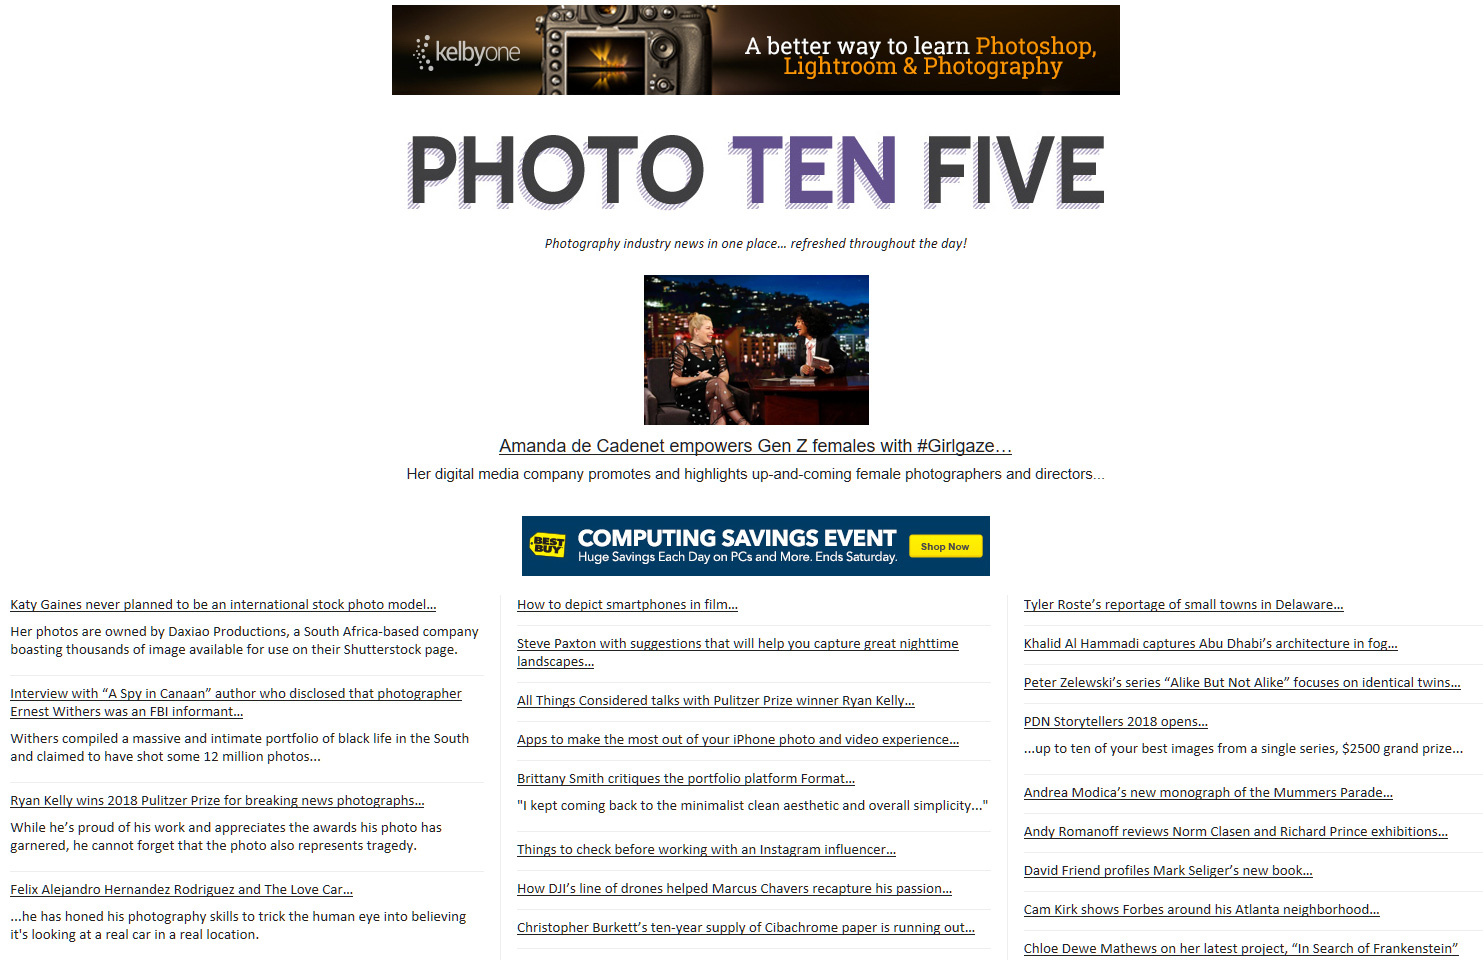 Photo Ten Five Home Page